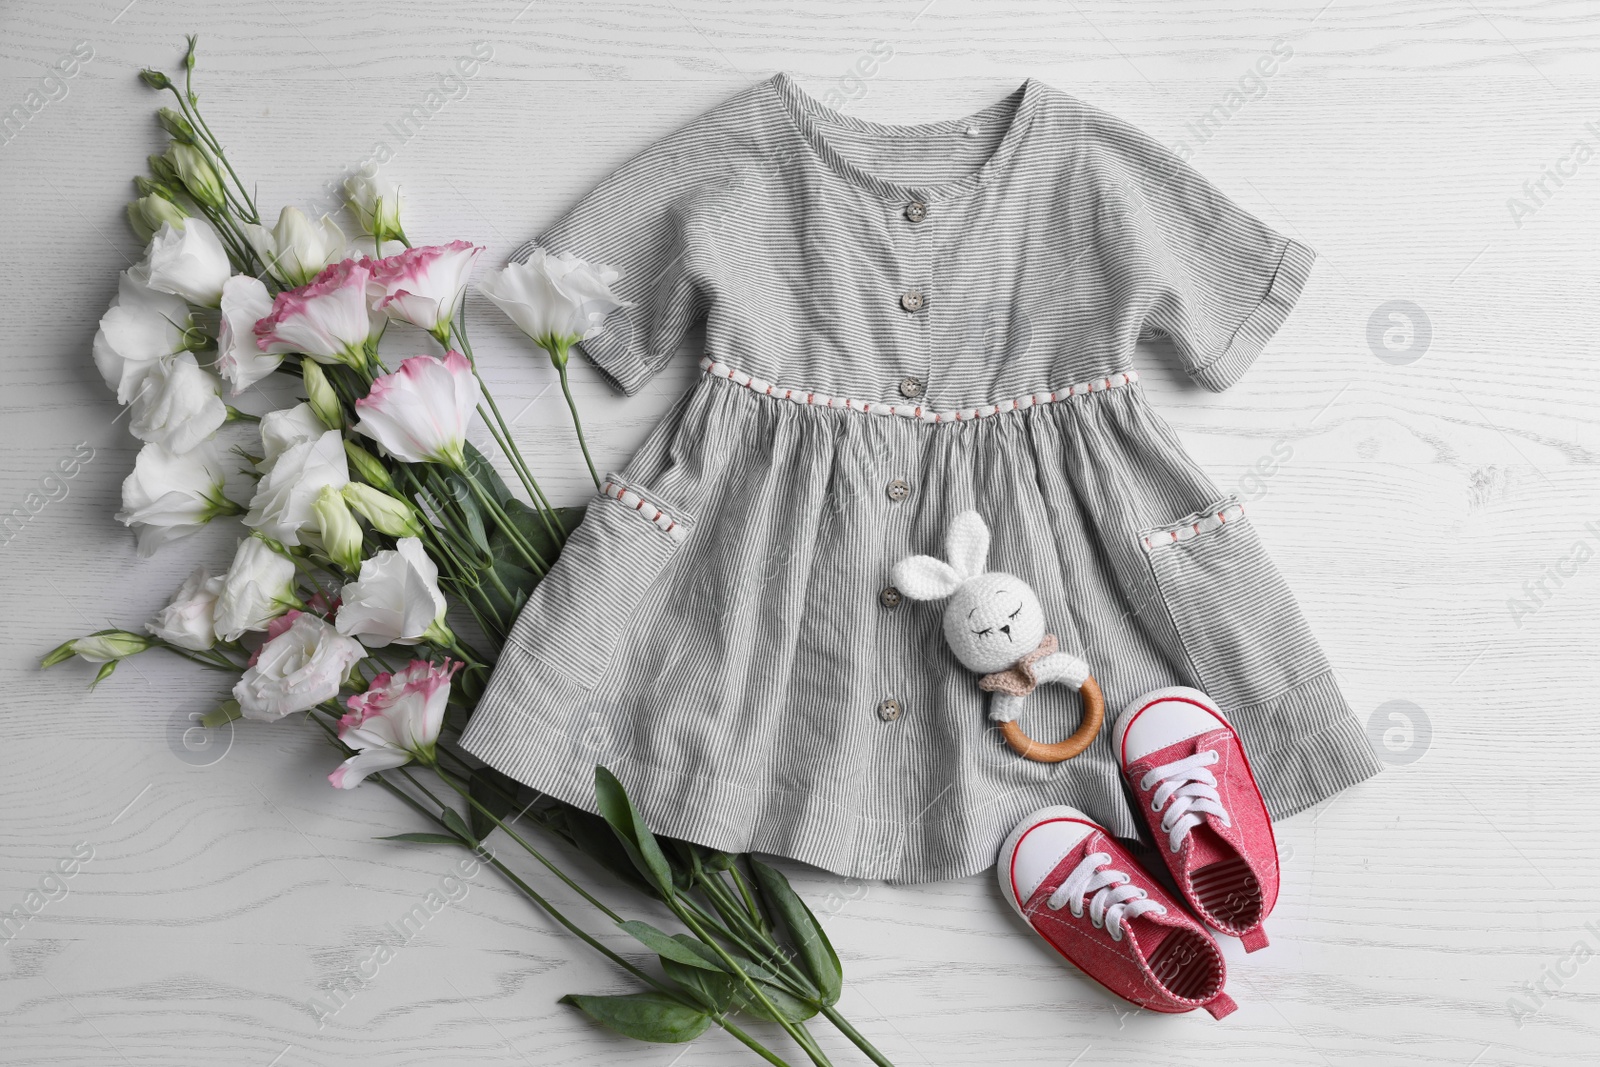 Photo of Baby dress, shoes, toy and flowers on white wooden table, flat lay